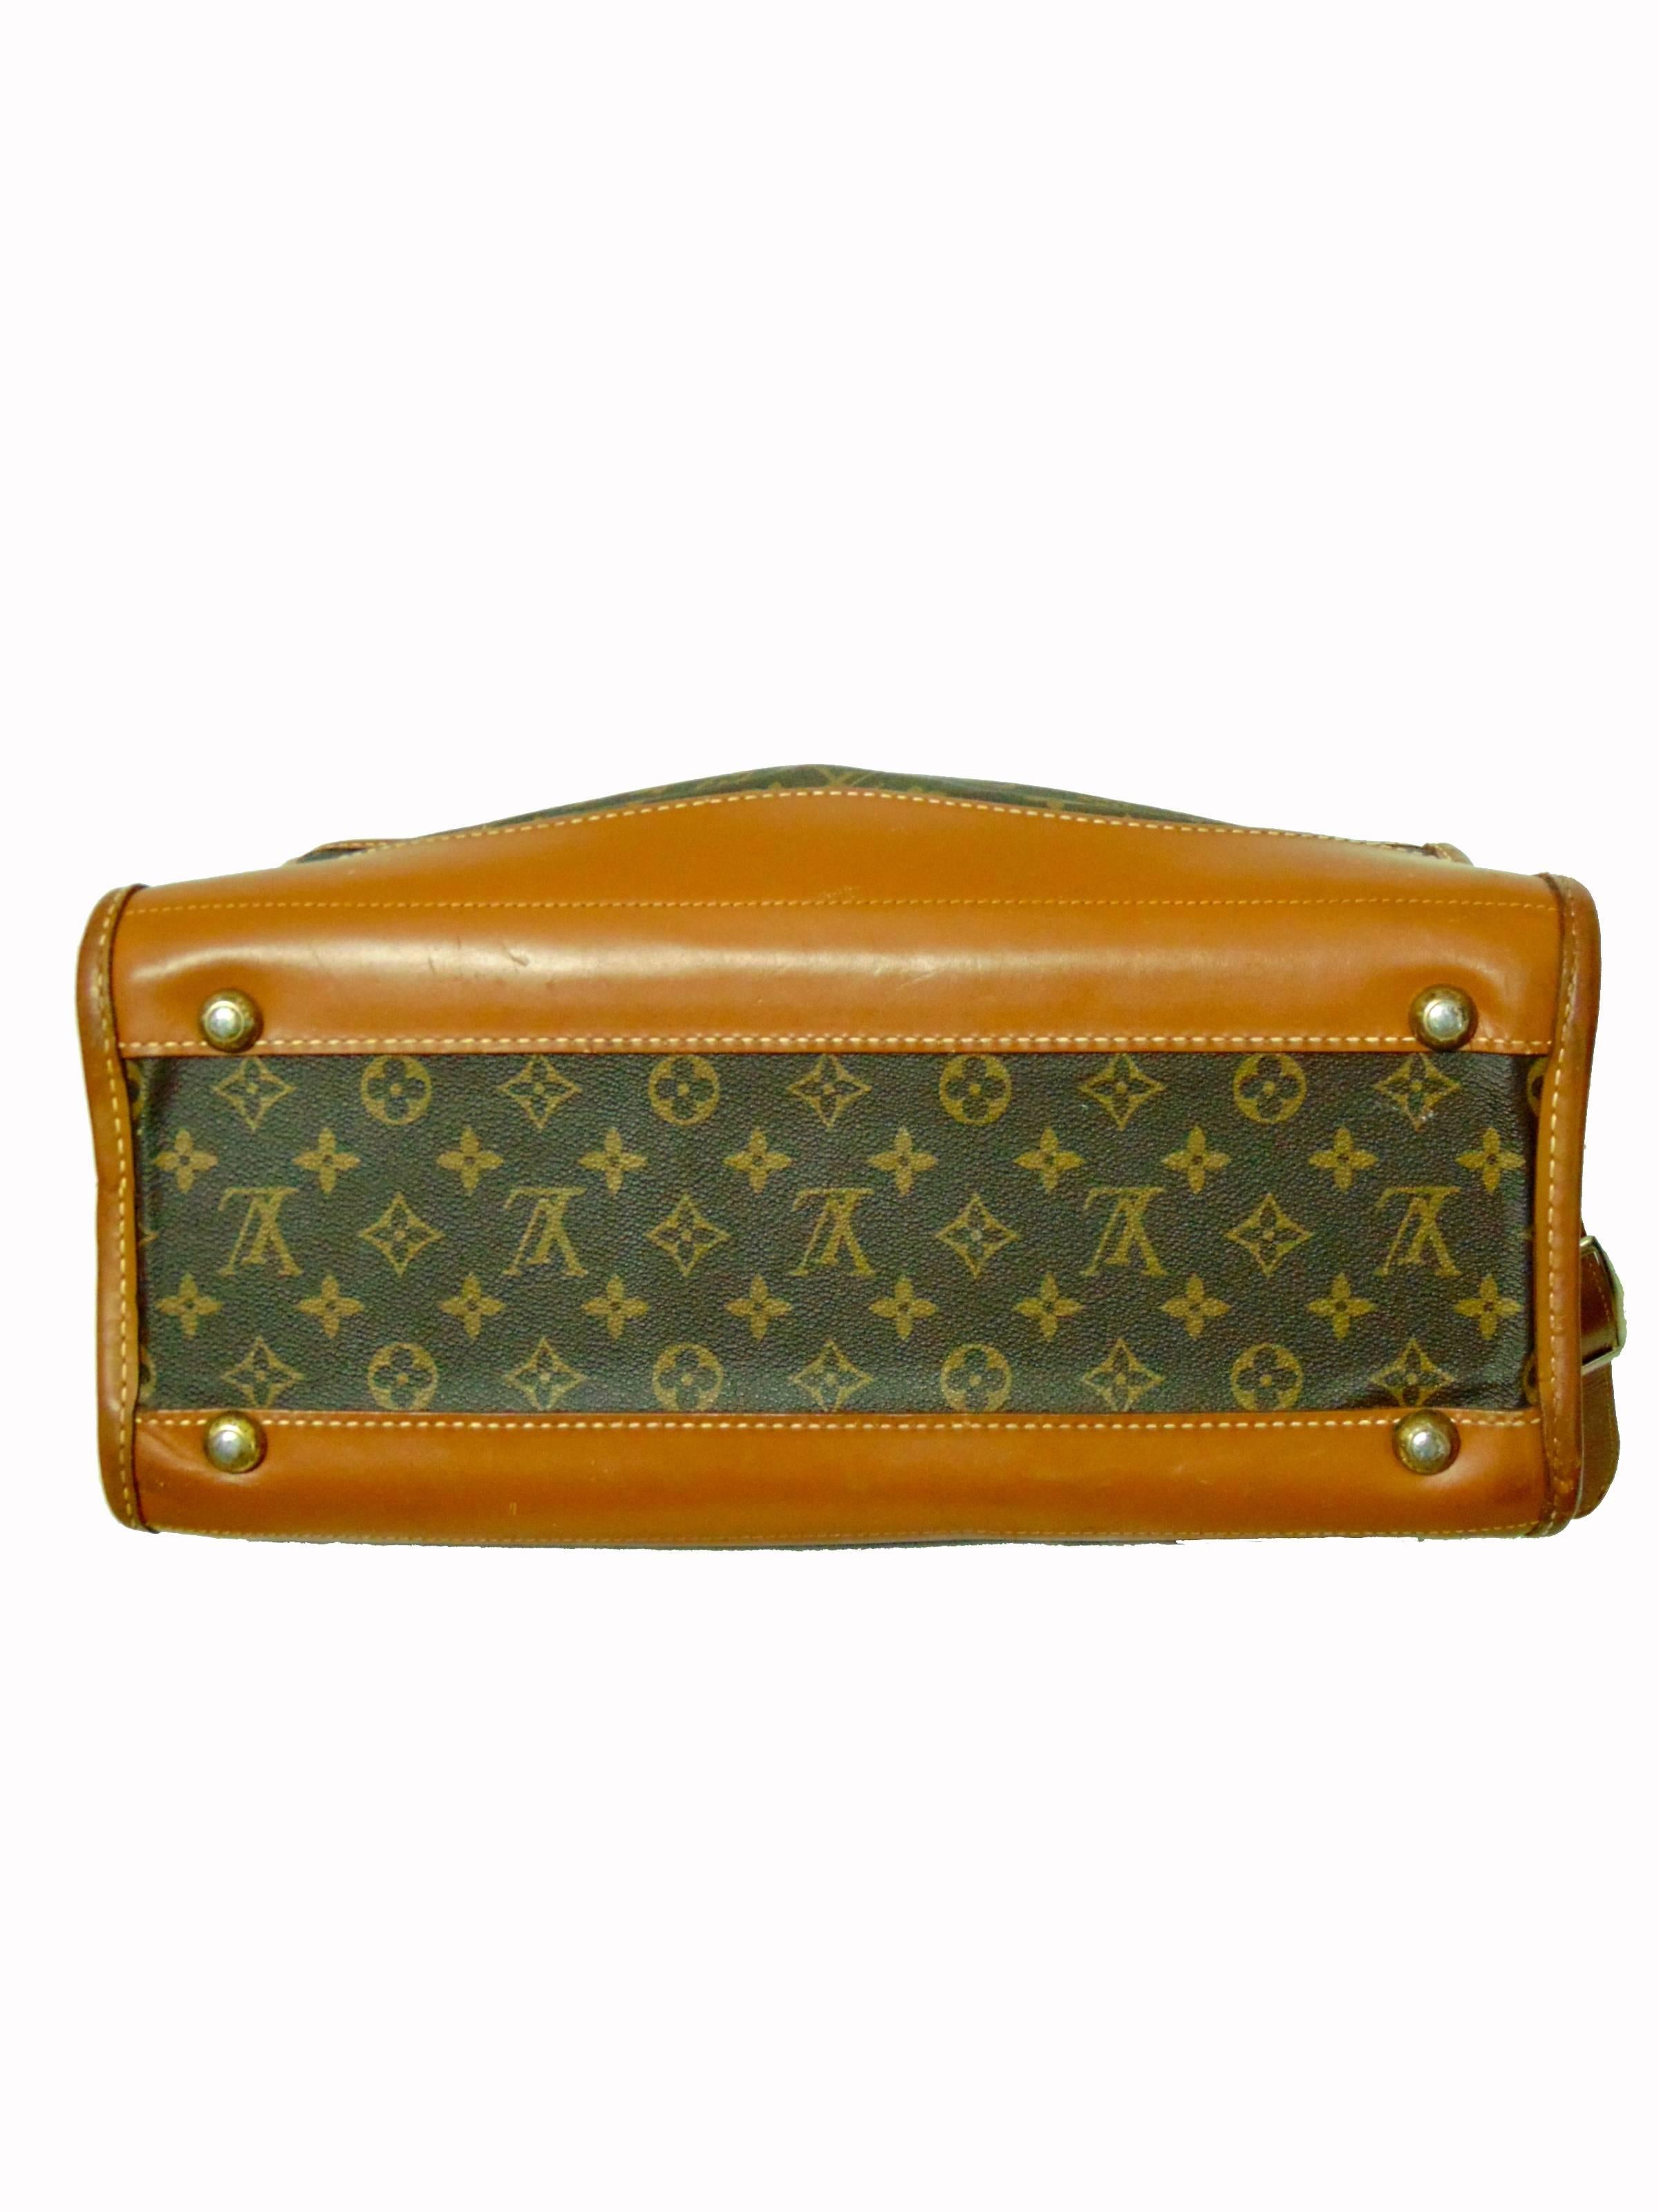 Louis Vuitton The French Company Carry On Travel Bag Monogram Canvas 1970s In Excellent Condition In Port Saint Lucie, FL